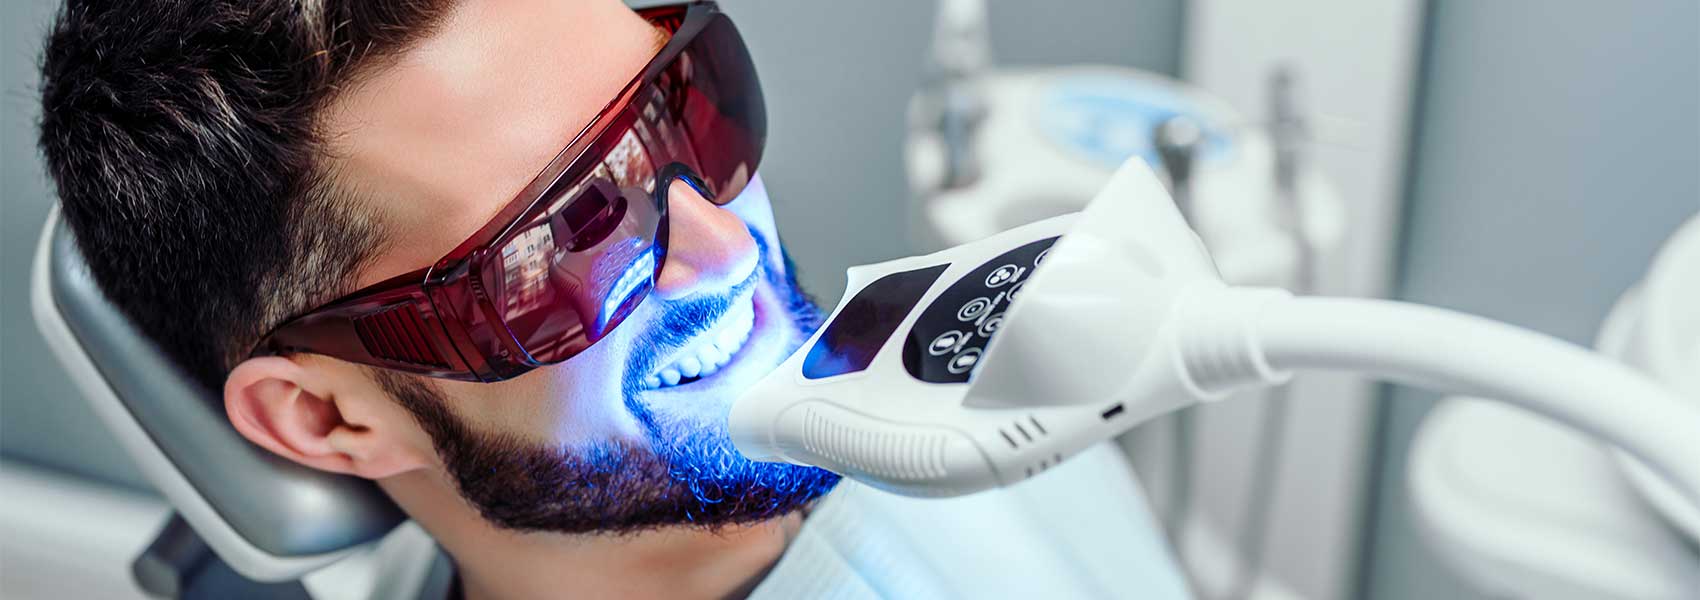 A young man using an advanced tooth whitening system at the dental